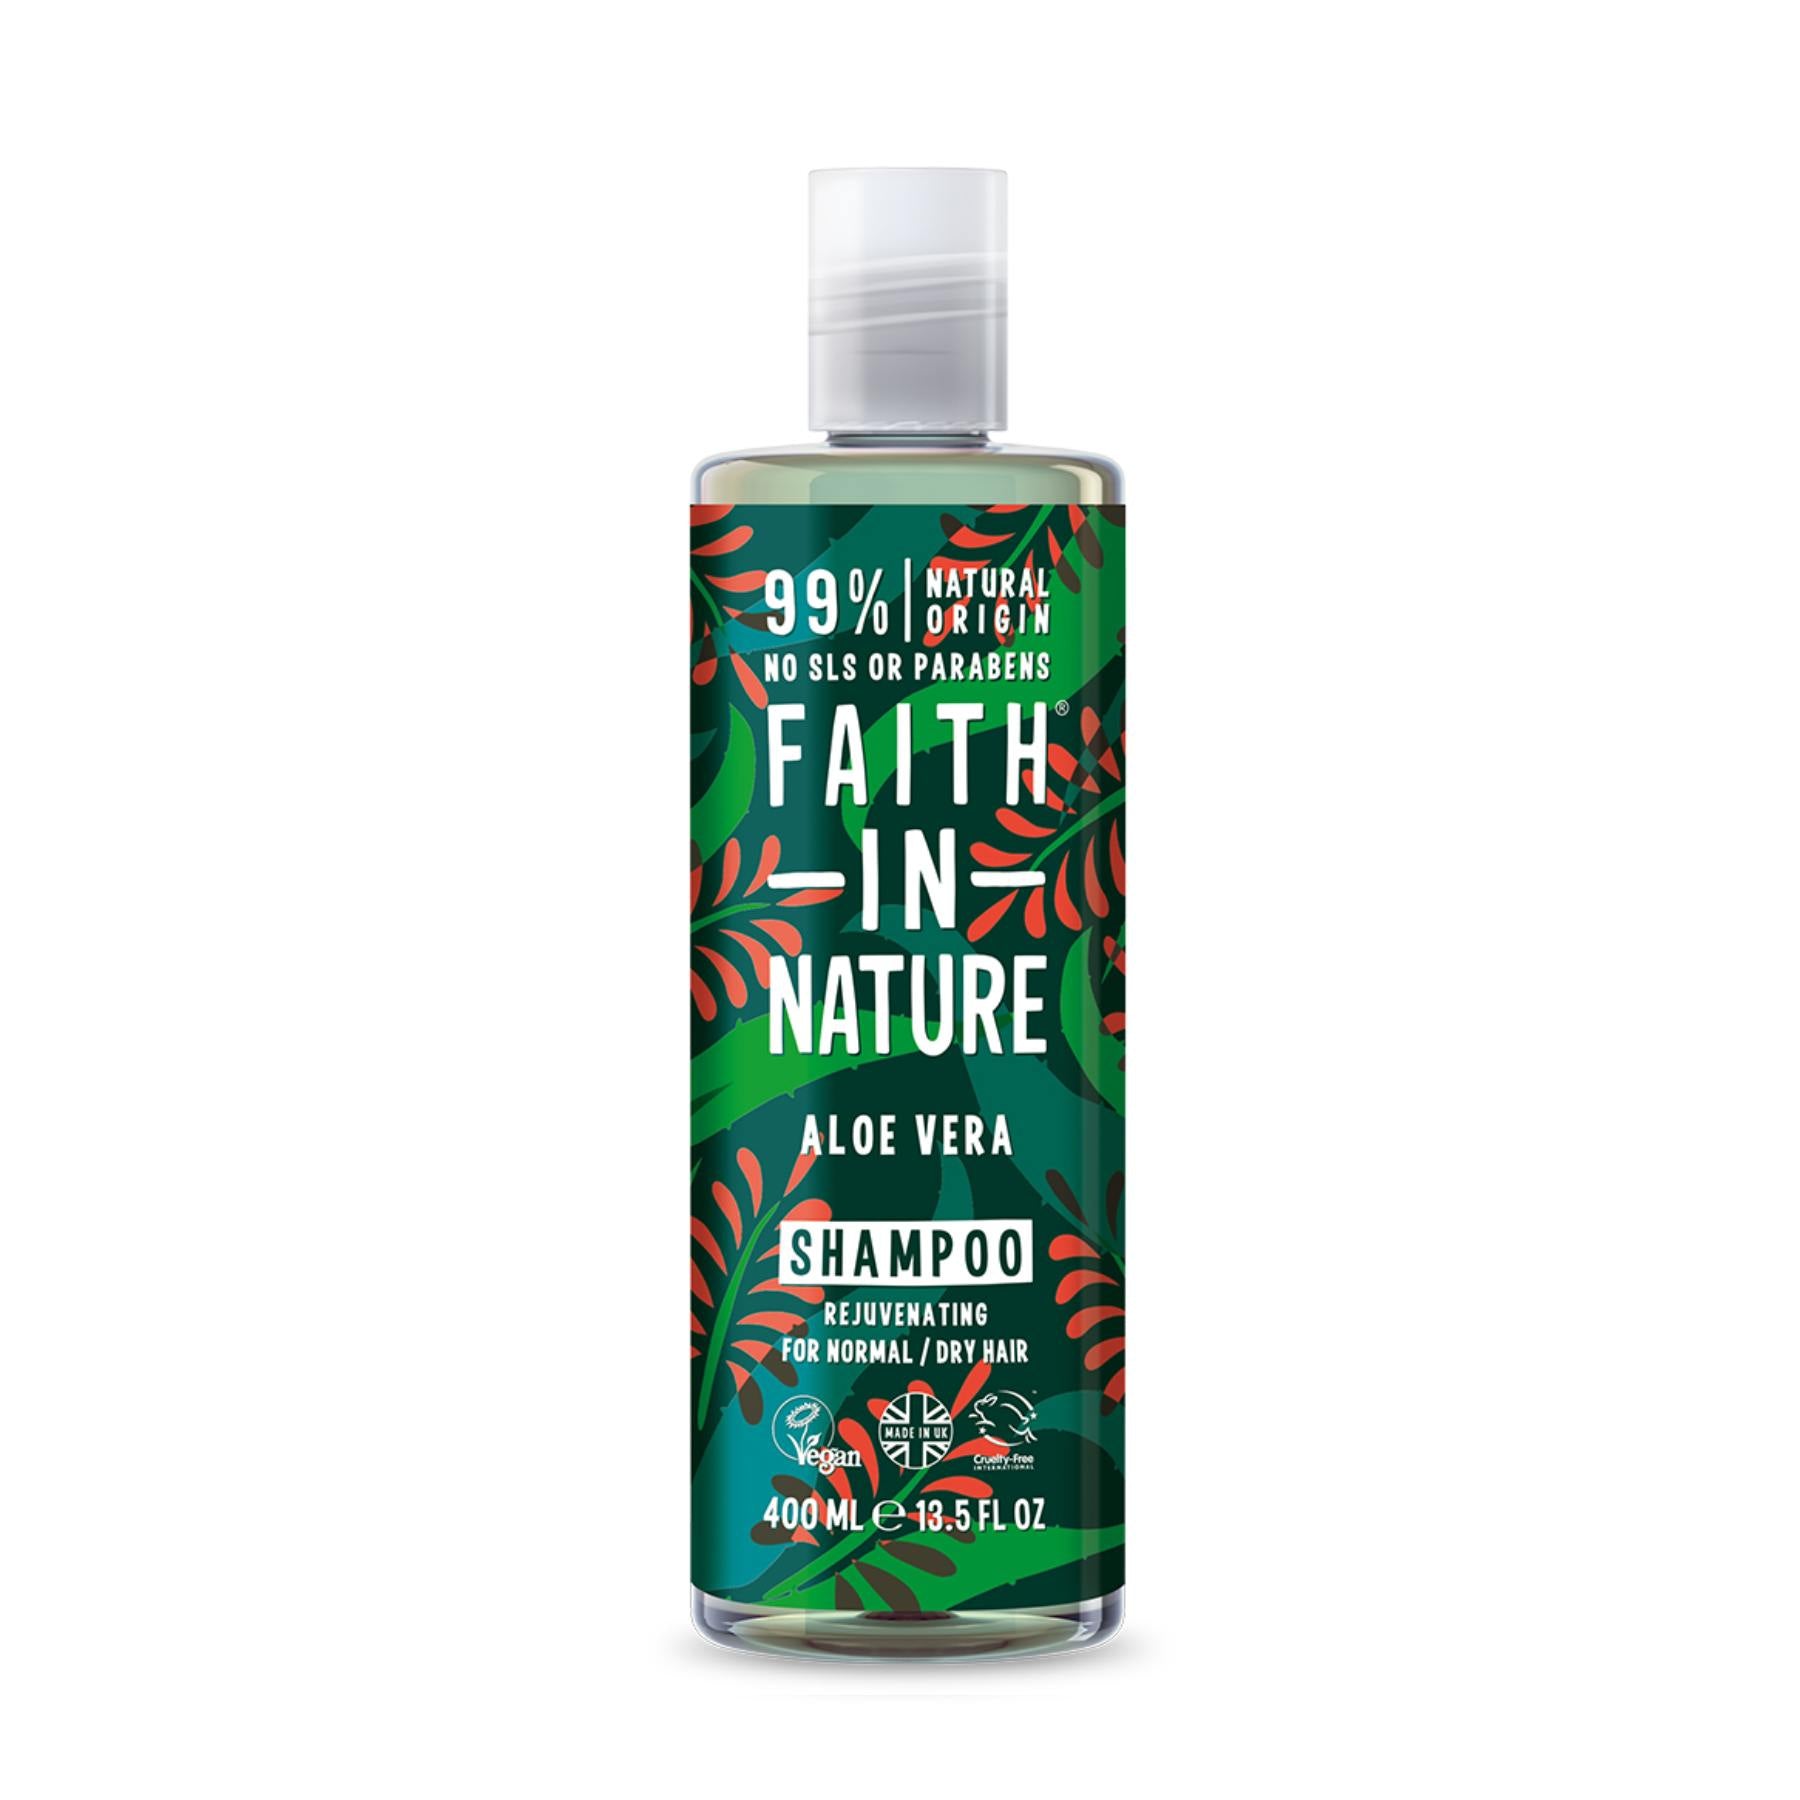 Shop Aloe Vera Shampoo from Faith in Nature on SublimeLife.in. Best for calming your dry and itchy scalp.